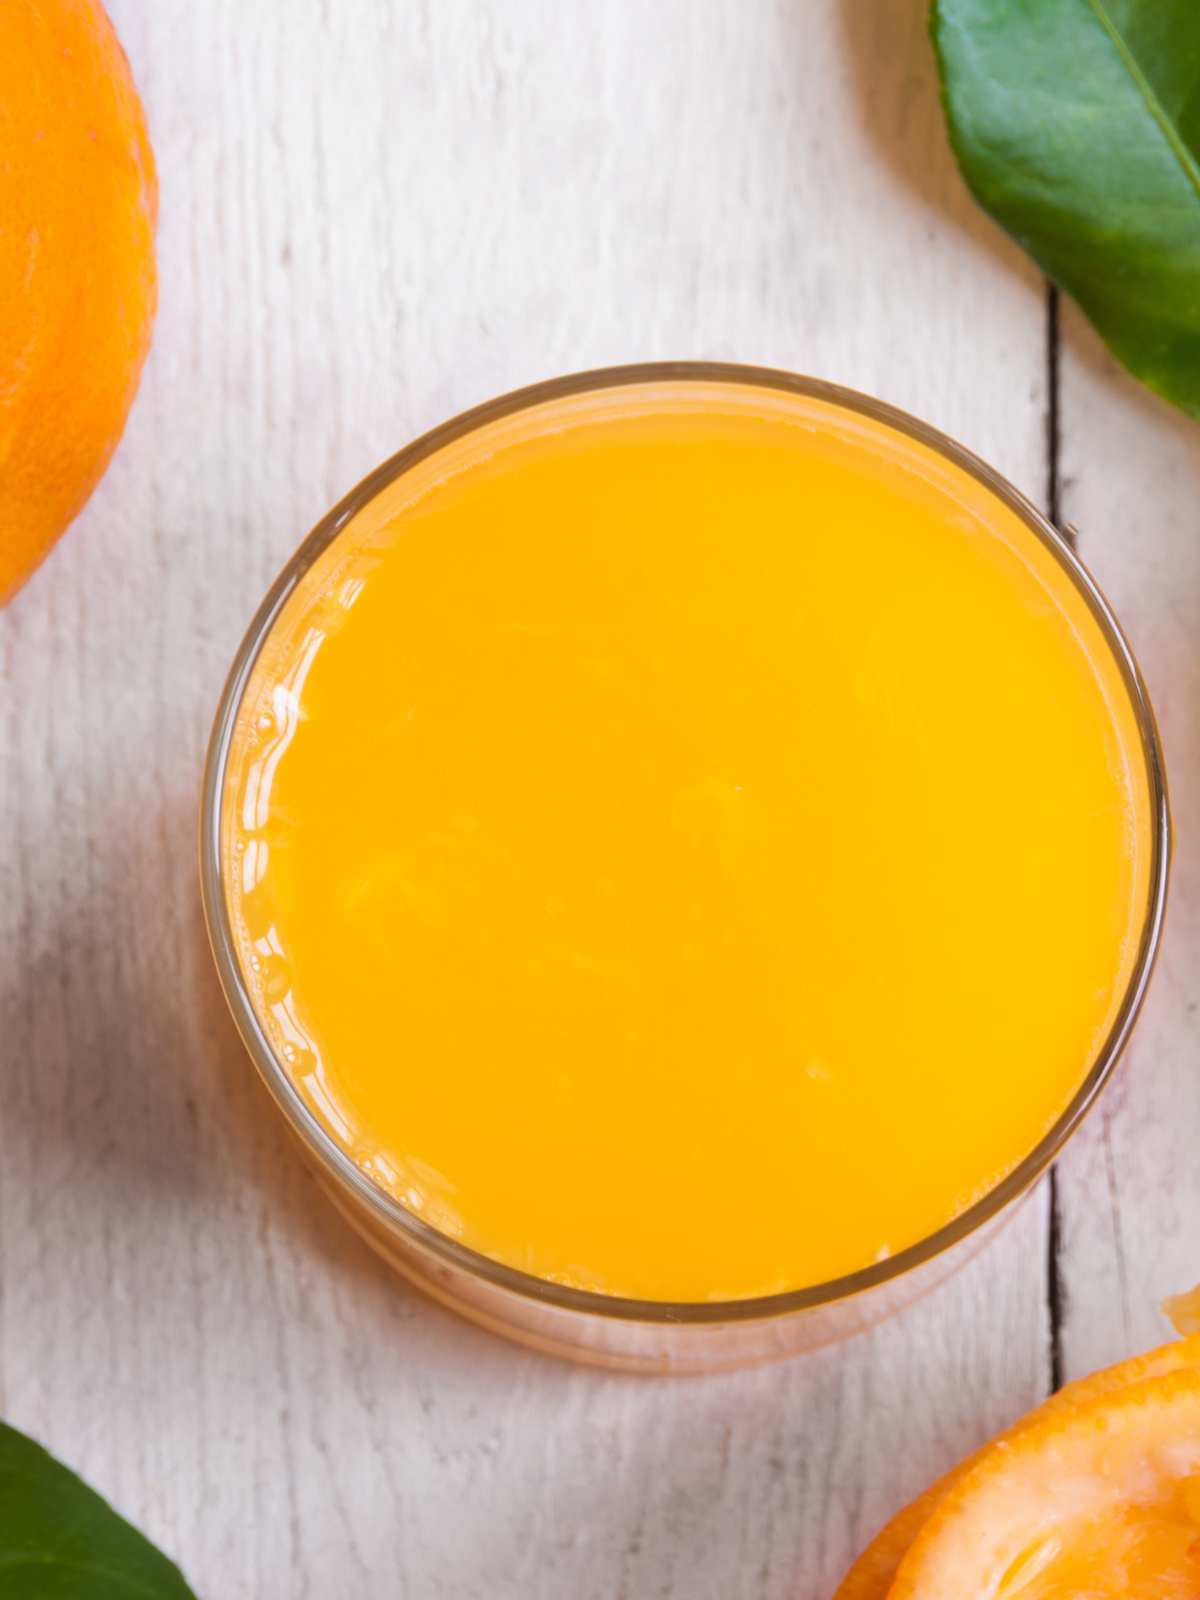 An overhead view of a glass of orange juice.